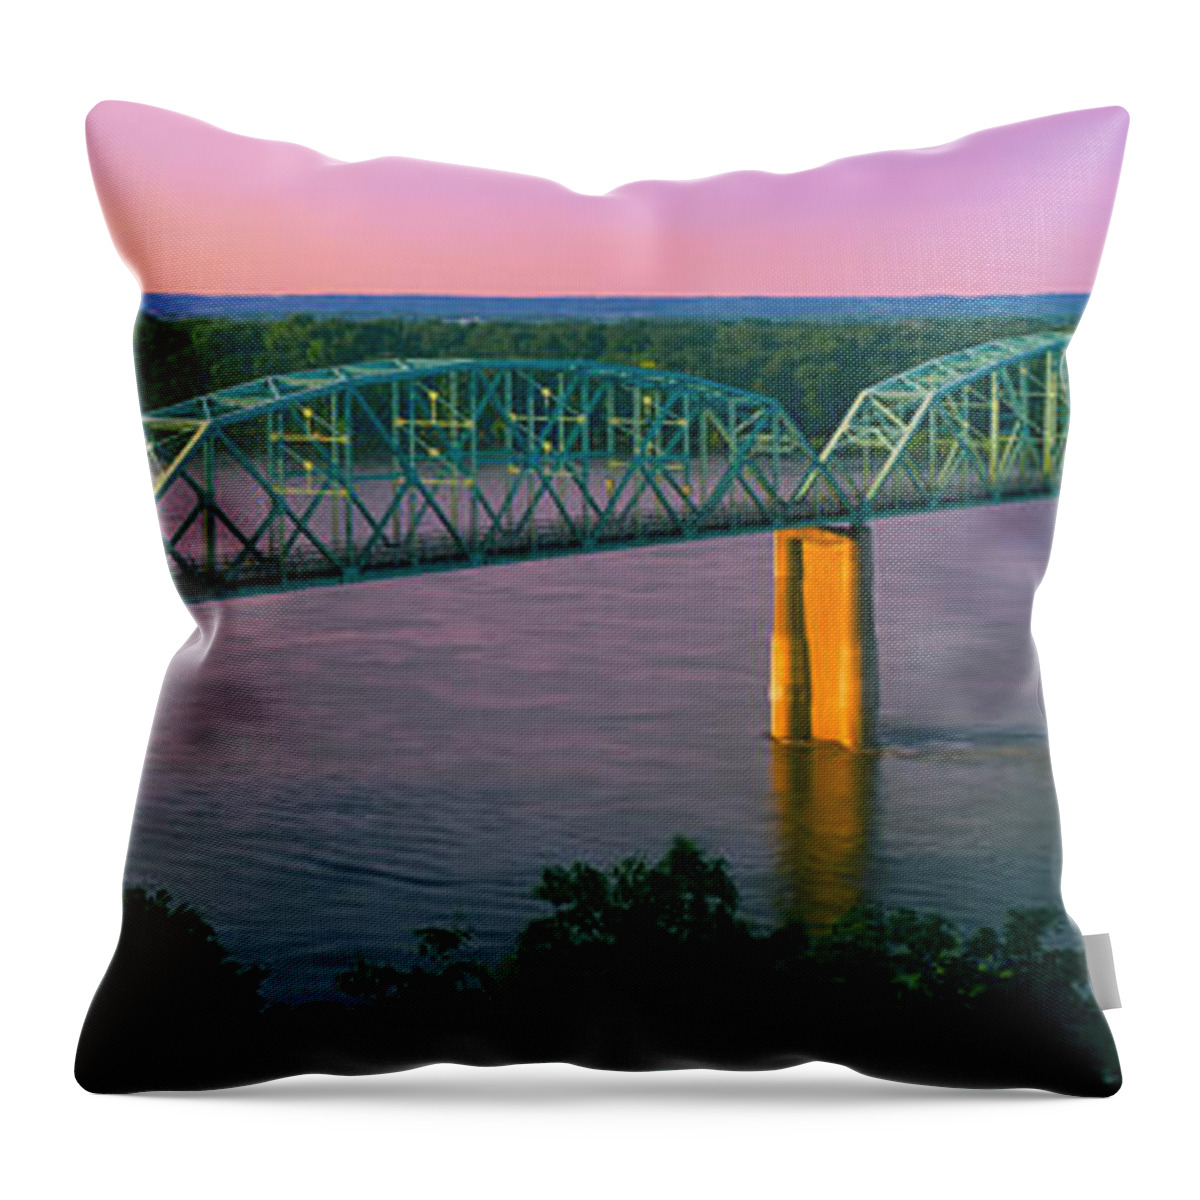 Photography Throw Pillow featuring the photograph Usa, Missouri, High Angle View by Panoramic Images